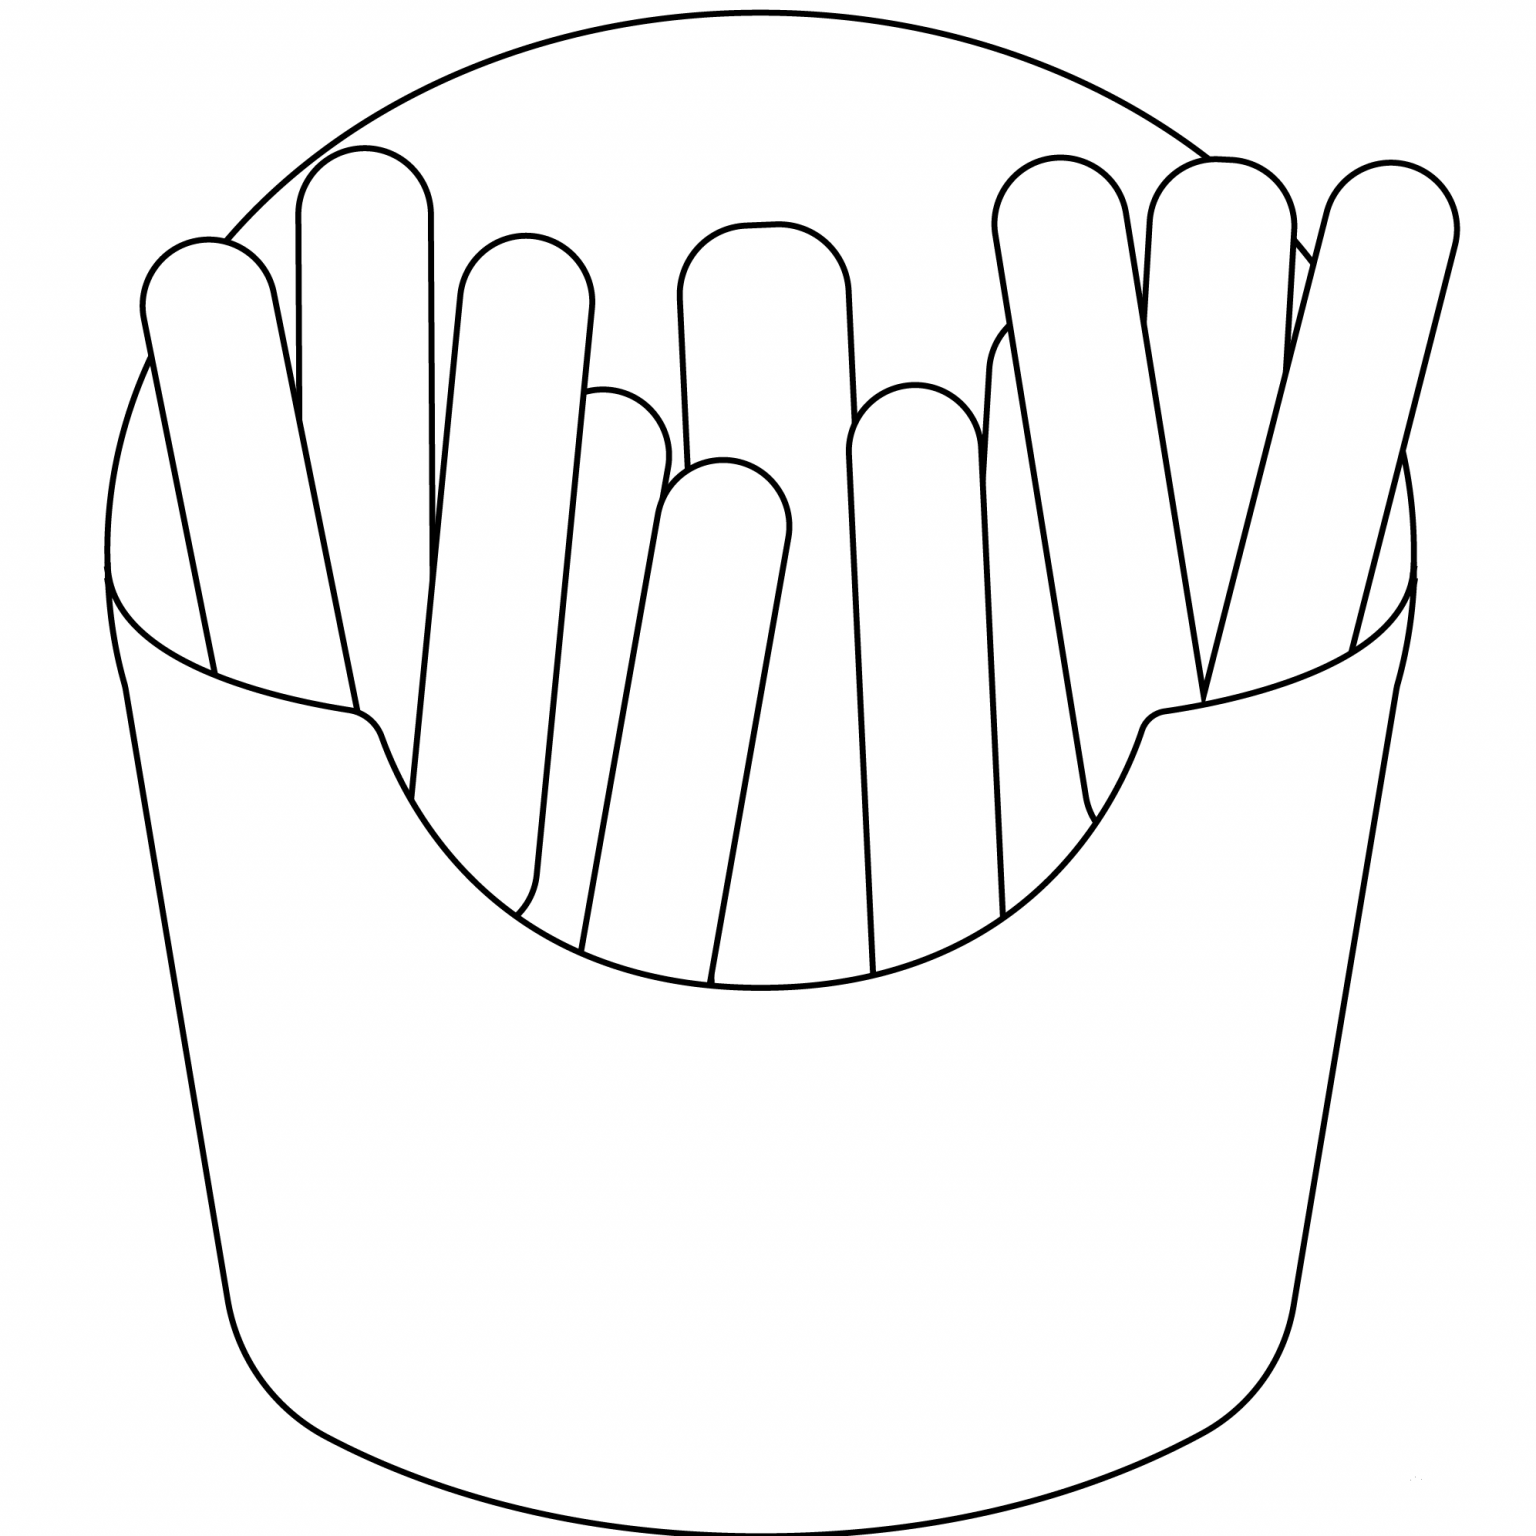 French Fries Emoji coloring page - ColouringPages